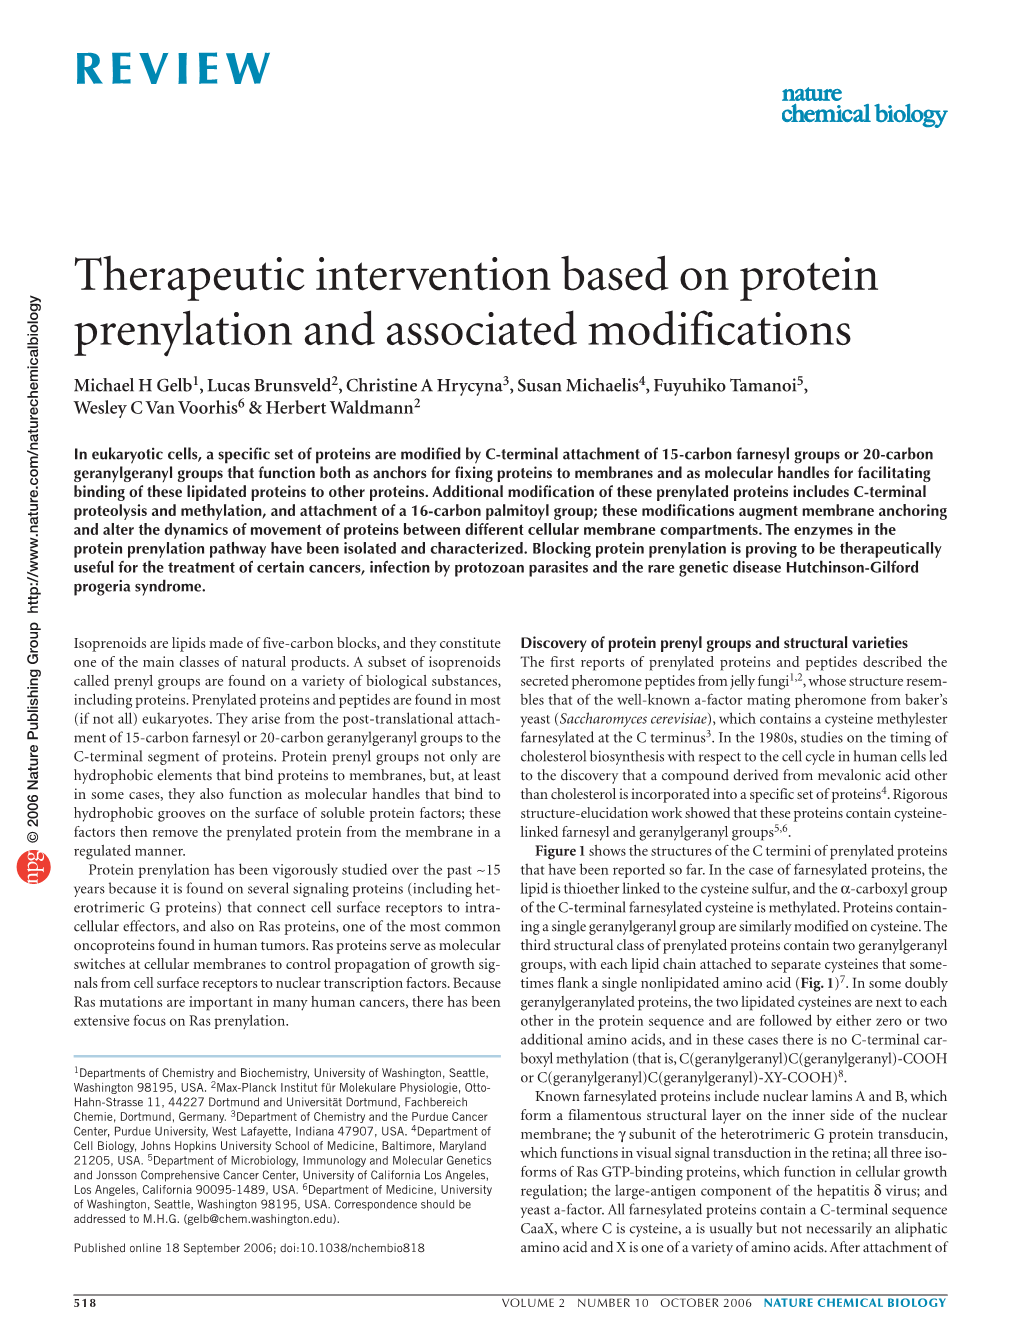 Therapeutic Intervention Based on Protein Prenylation and Associated Modifications